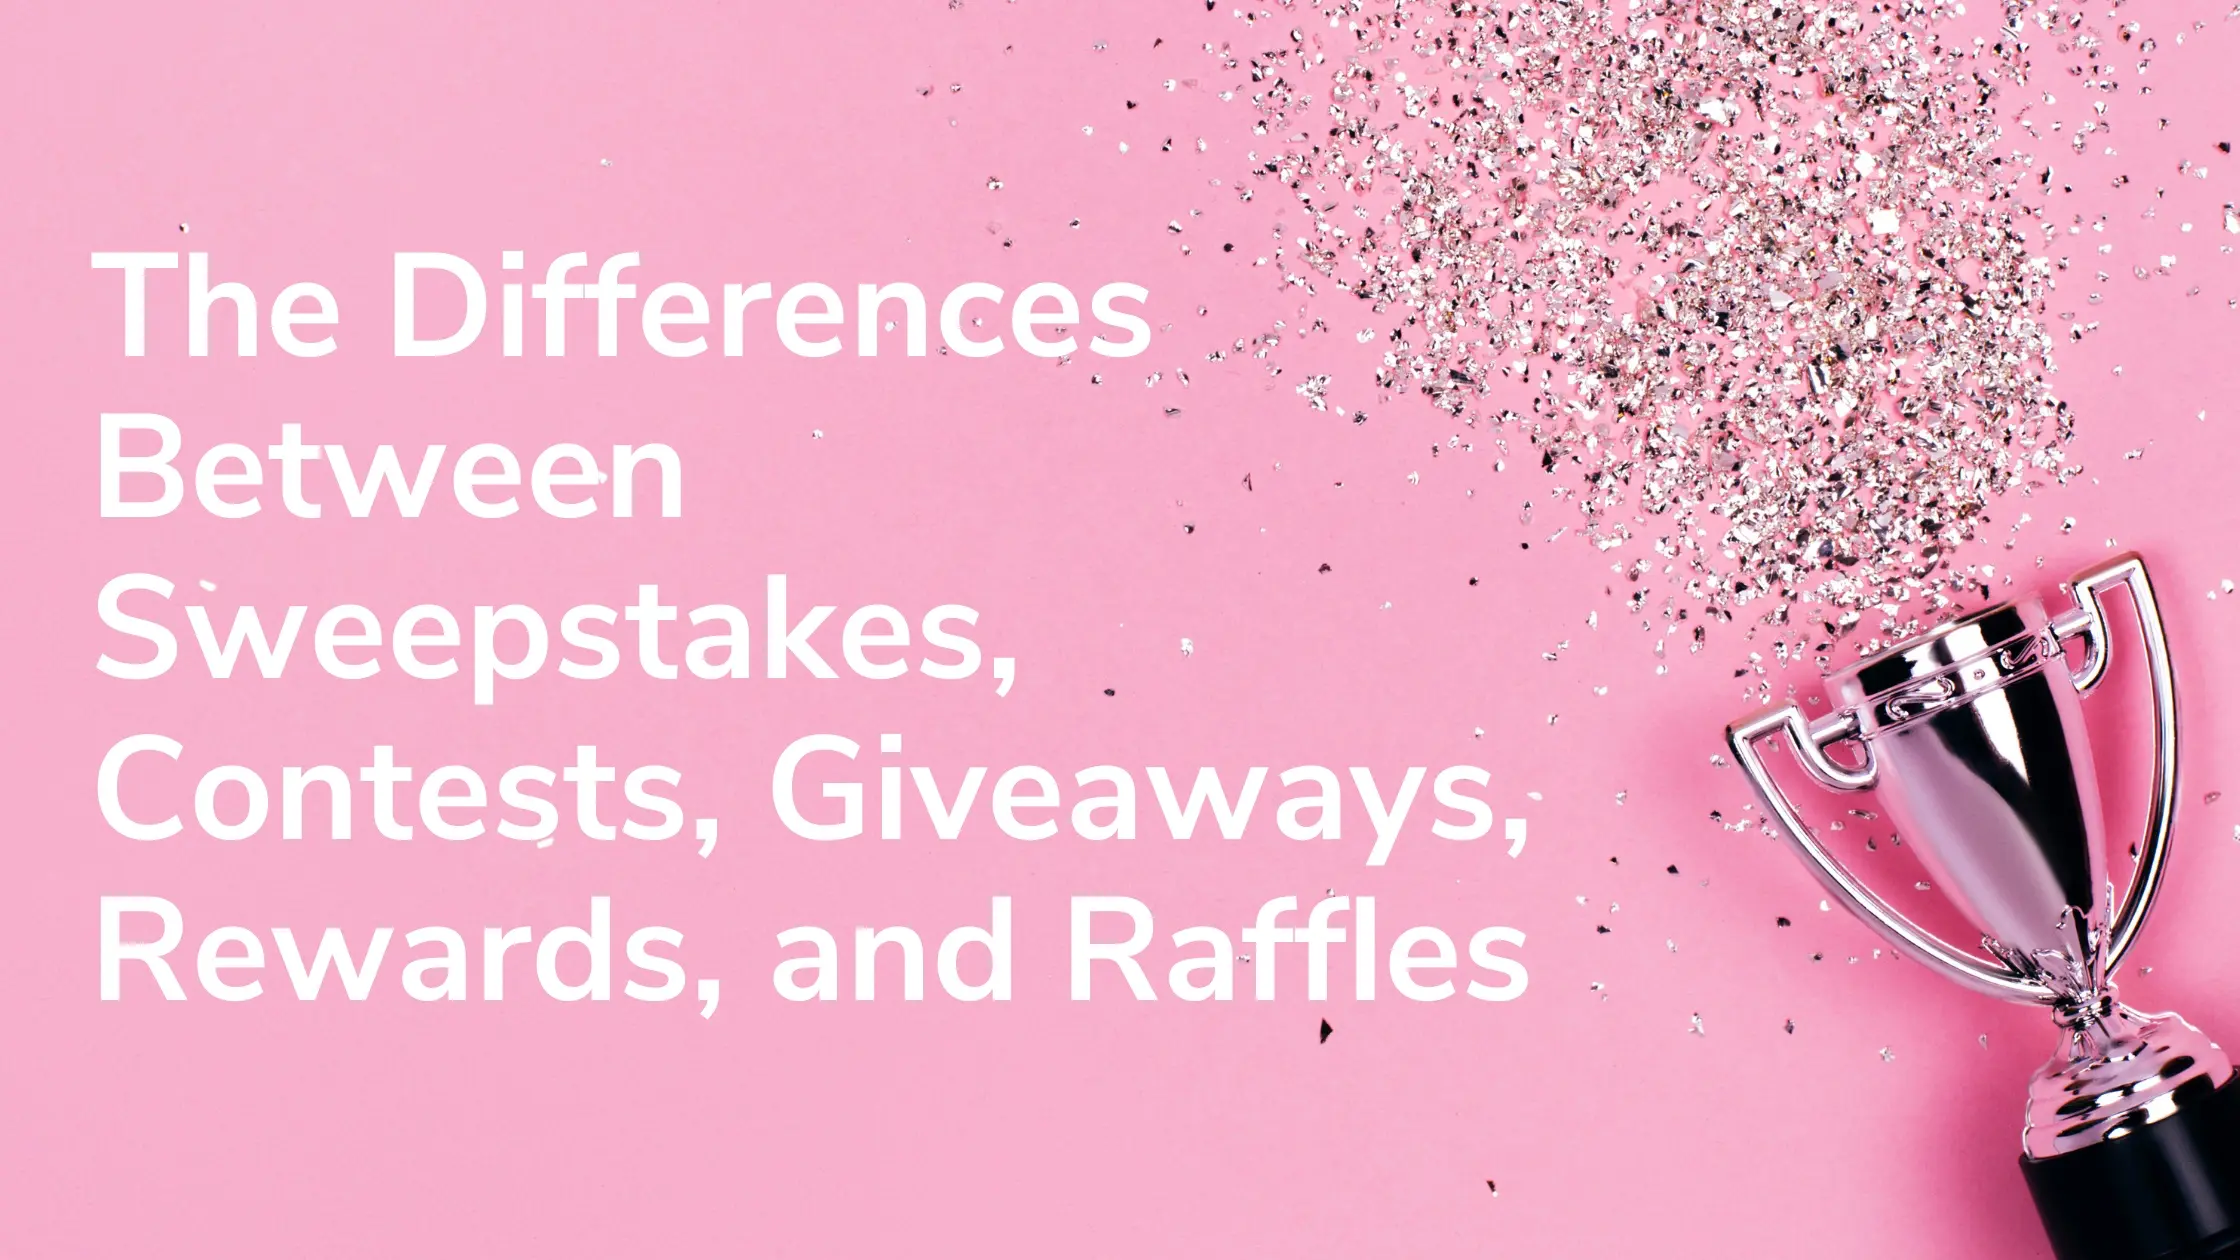 The Differences Between Sweepstakes, Contests, Giveaways, Rewards, and Raffles